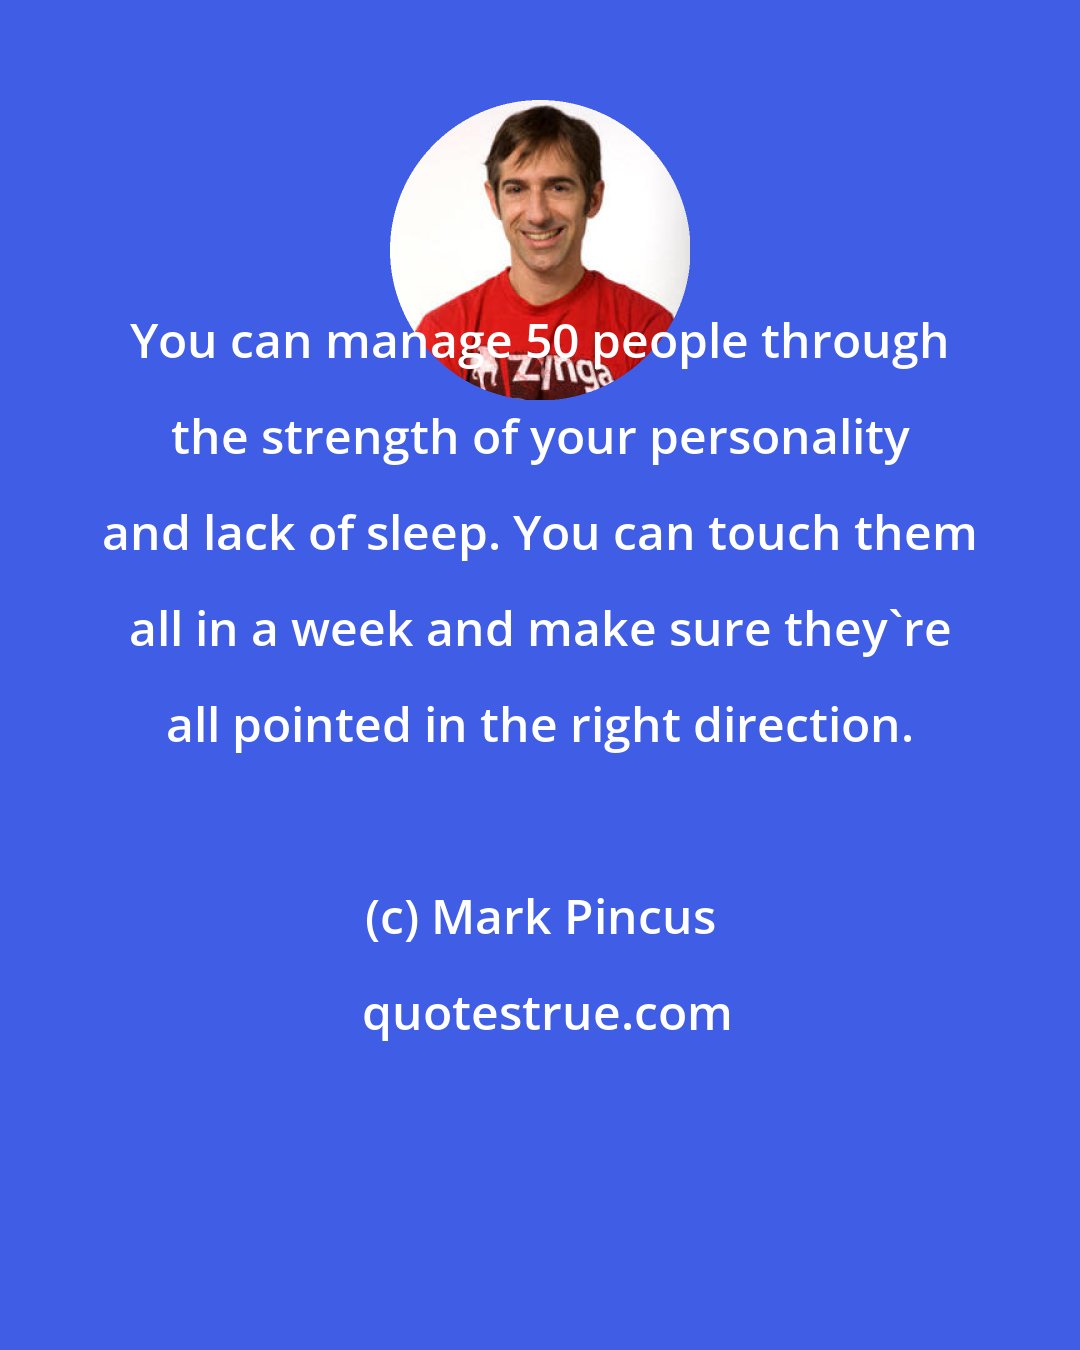 Mark Pincus: You can manage 50 people through the strength of your personality and lack of sleep. You can touch them all in a week and make sure they're all pointed in the right direction.